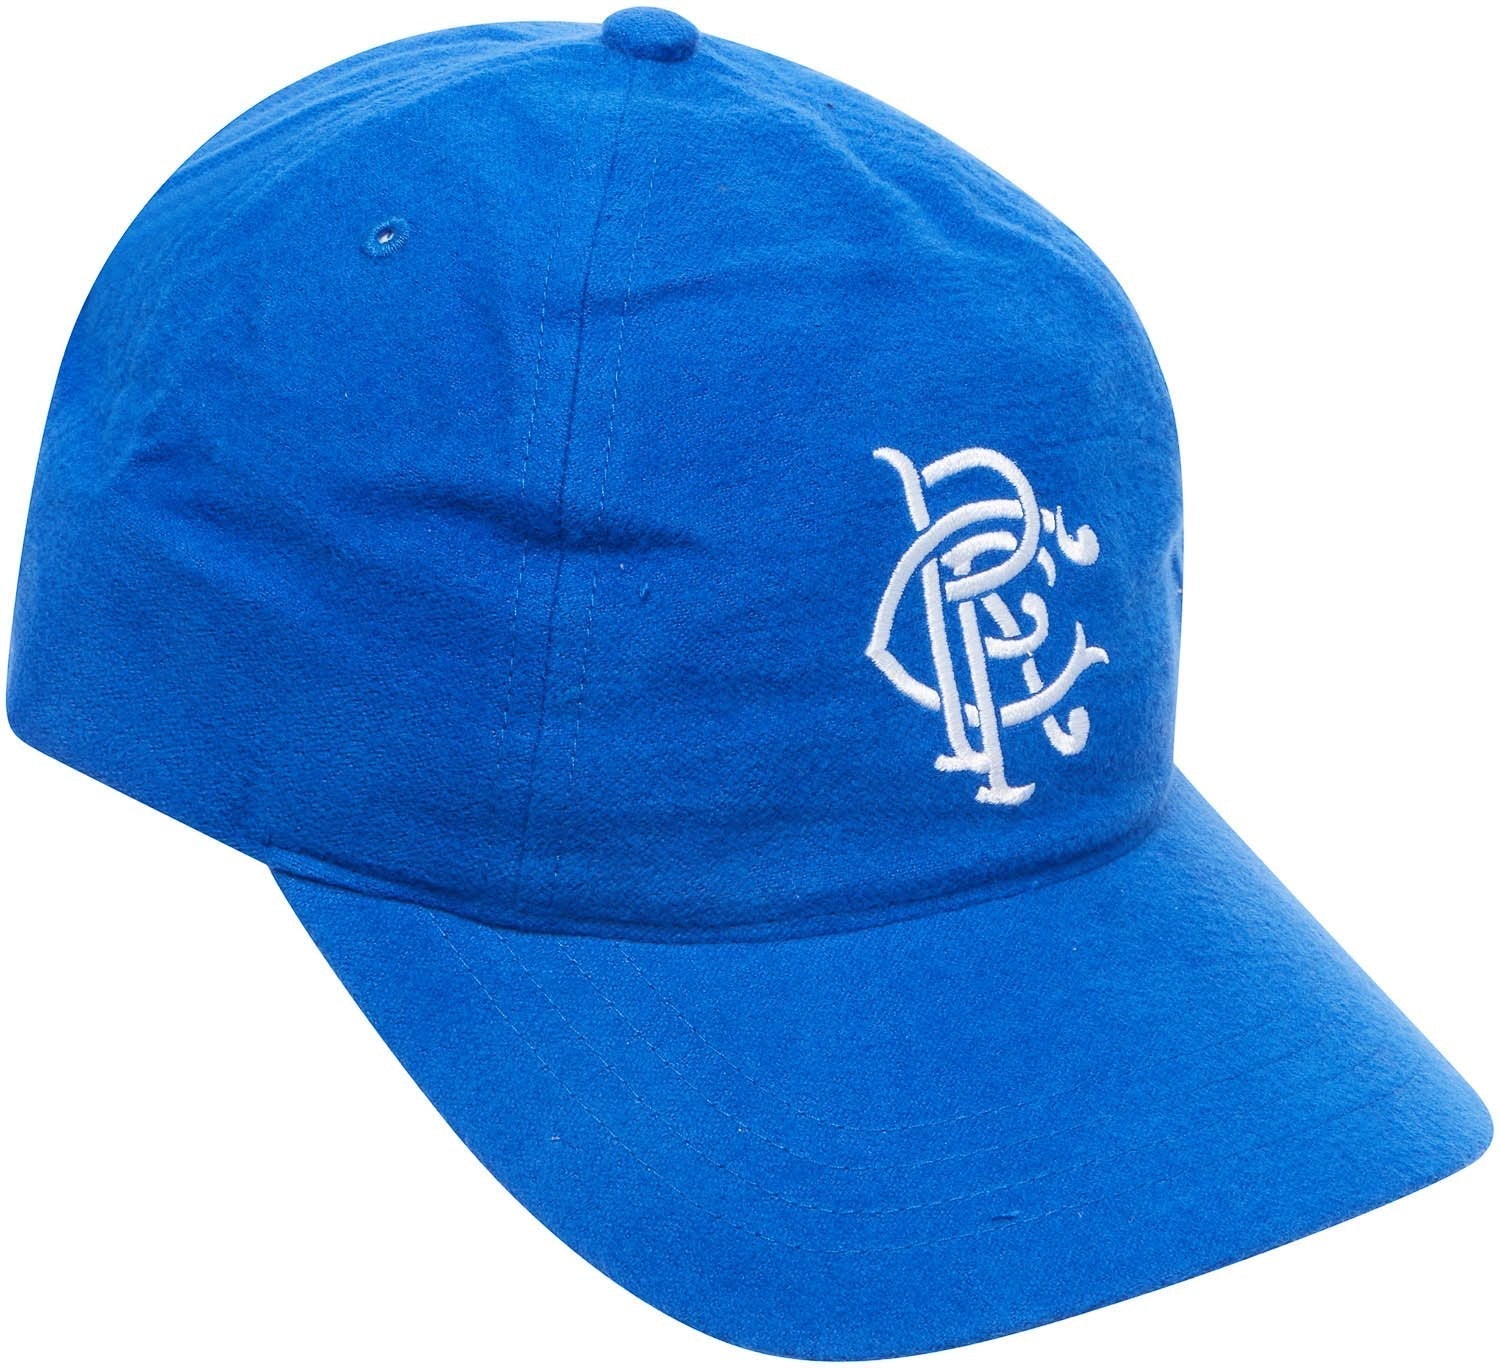 Rangers Early 2000's Nike Cap-Unwanted FC-stride